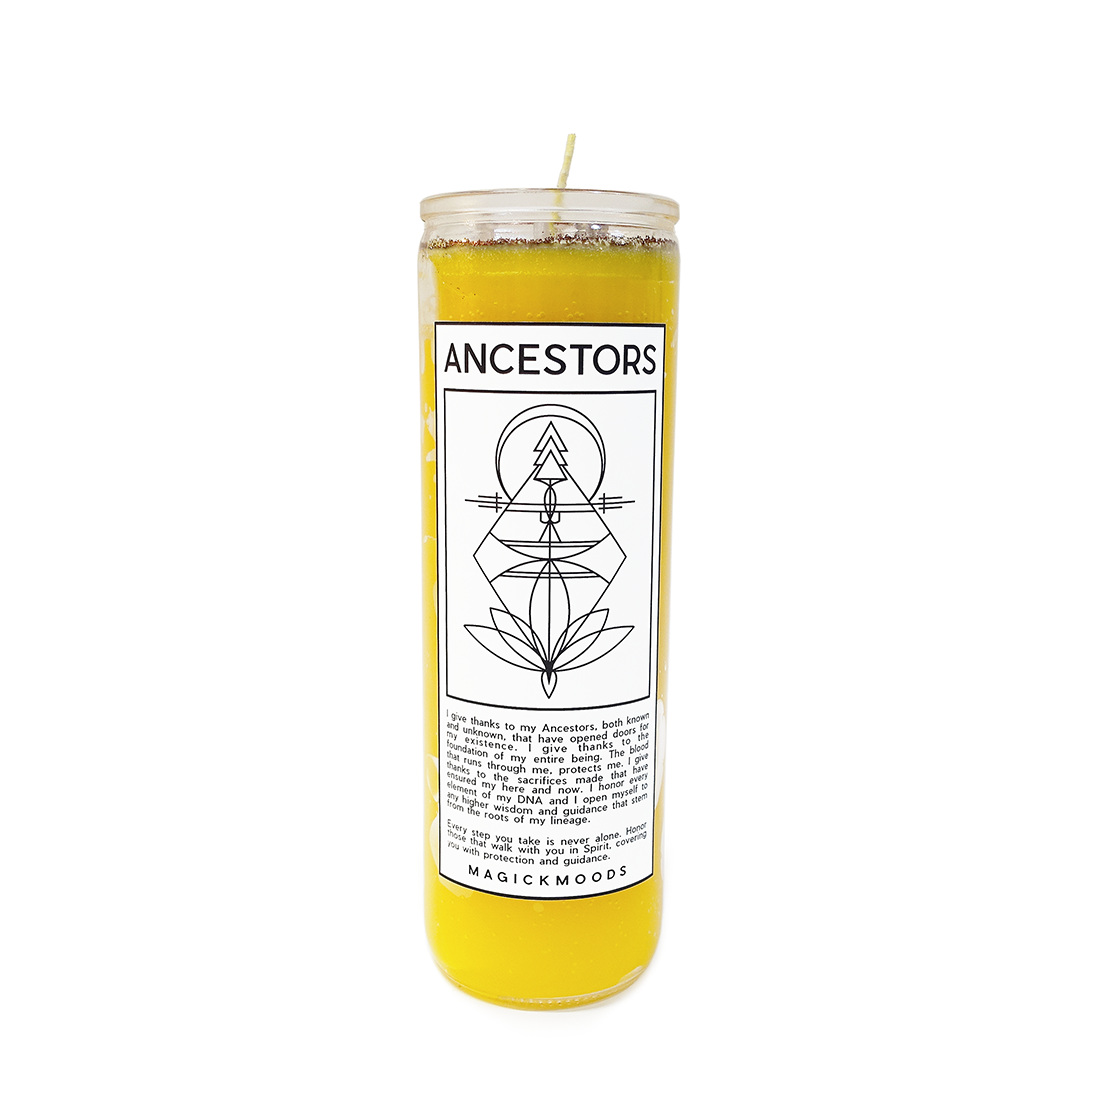 Ancestors 7-Day Meditation Candle - PREORDER - Ships by Feb 26th, 2024